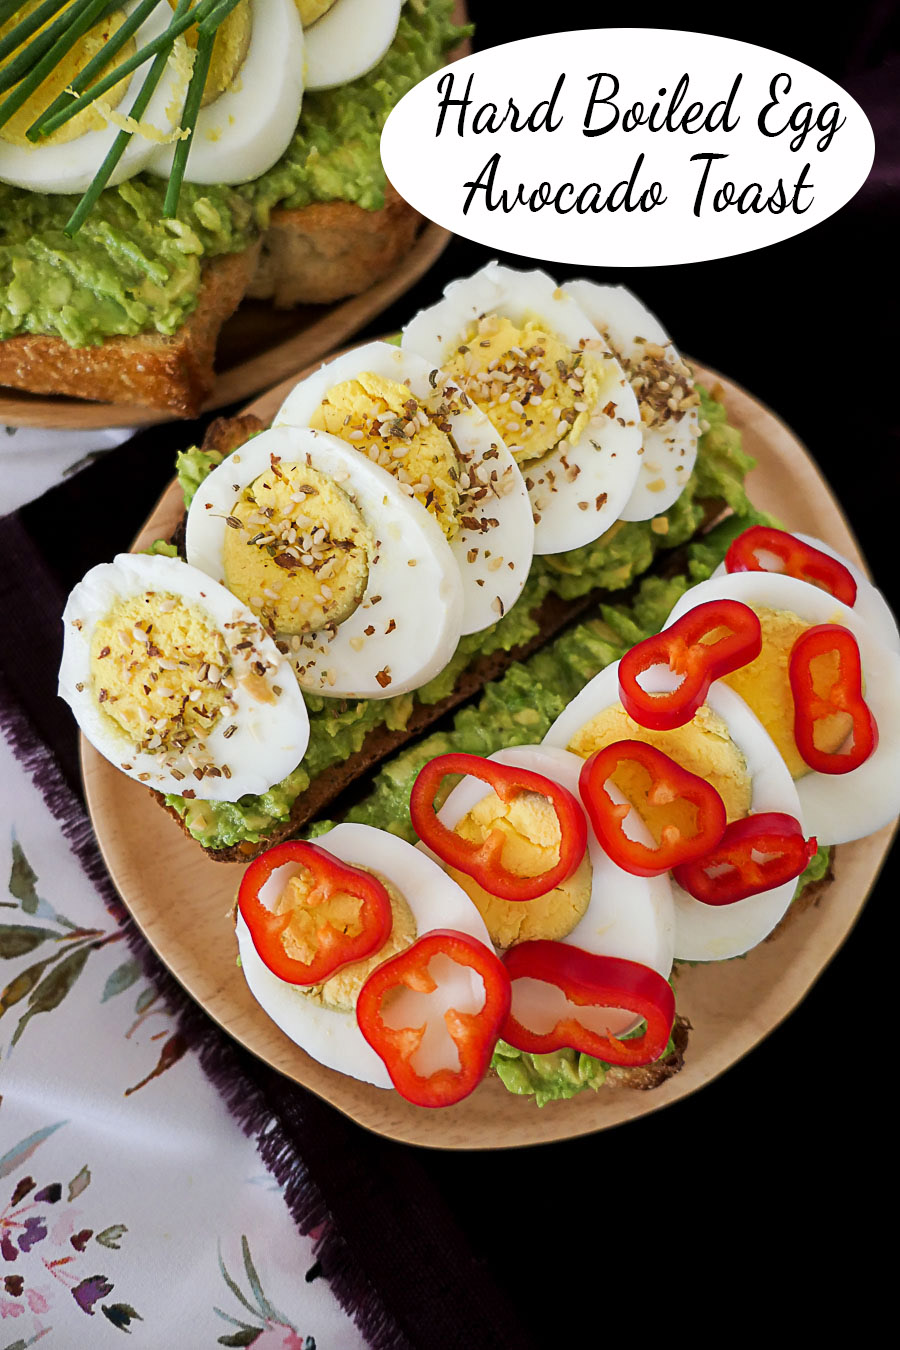 Hard Boiled Egg Breakfast Toast. These easy, make-ahead breakfast ideas are full of flavor, protein, and everything you want. Switch up these fun avocado toast toppings for extra crunch, veggies, and flavor ! #avocadotoast #breakfast #makeahead #vegetarian #lmreipces